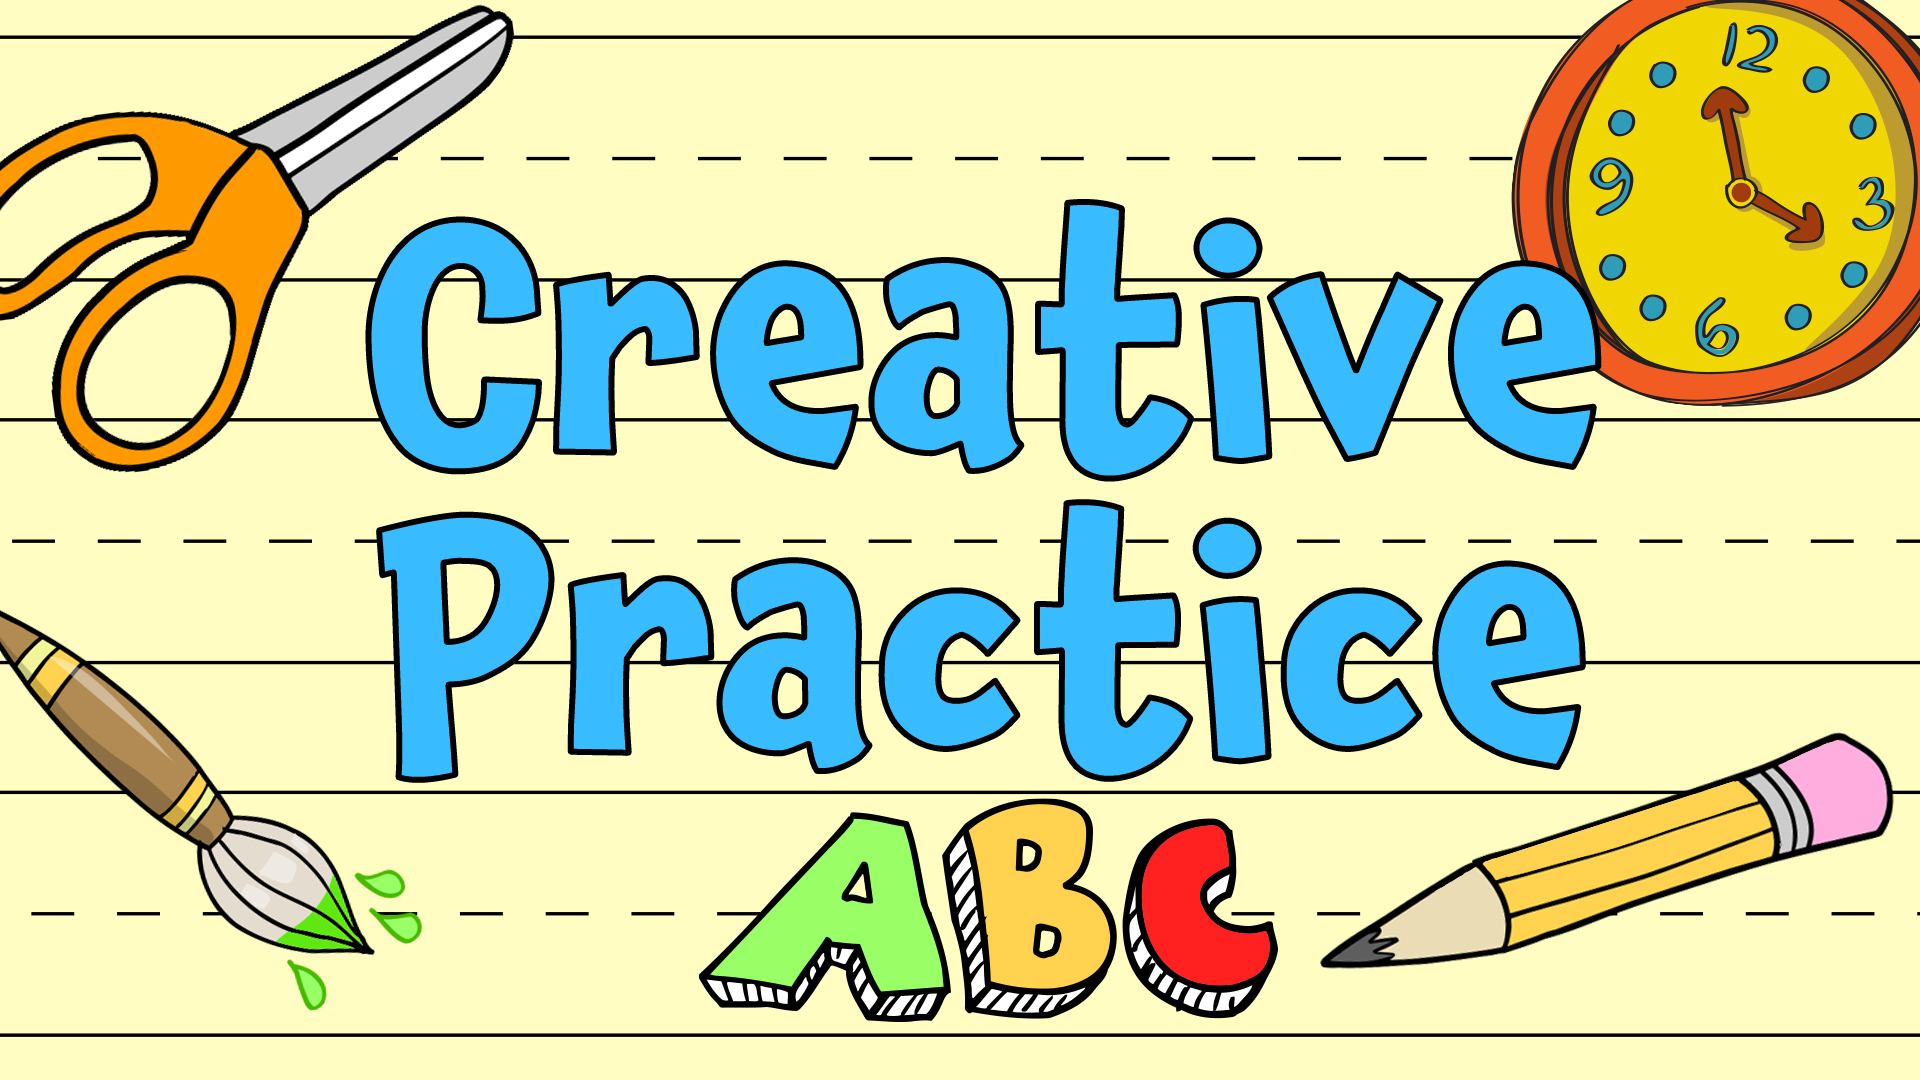 Image reads "Creative Practice" against a yellow-lined background. A pair of scissors, a paintbrush, a clock, a pencil, and letters are scattered among the image.